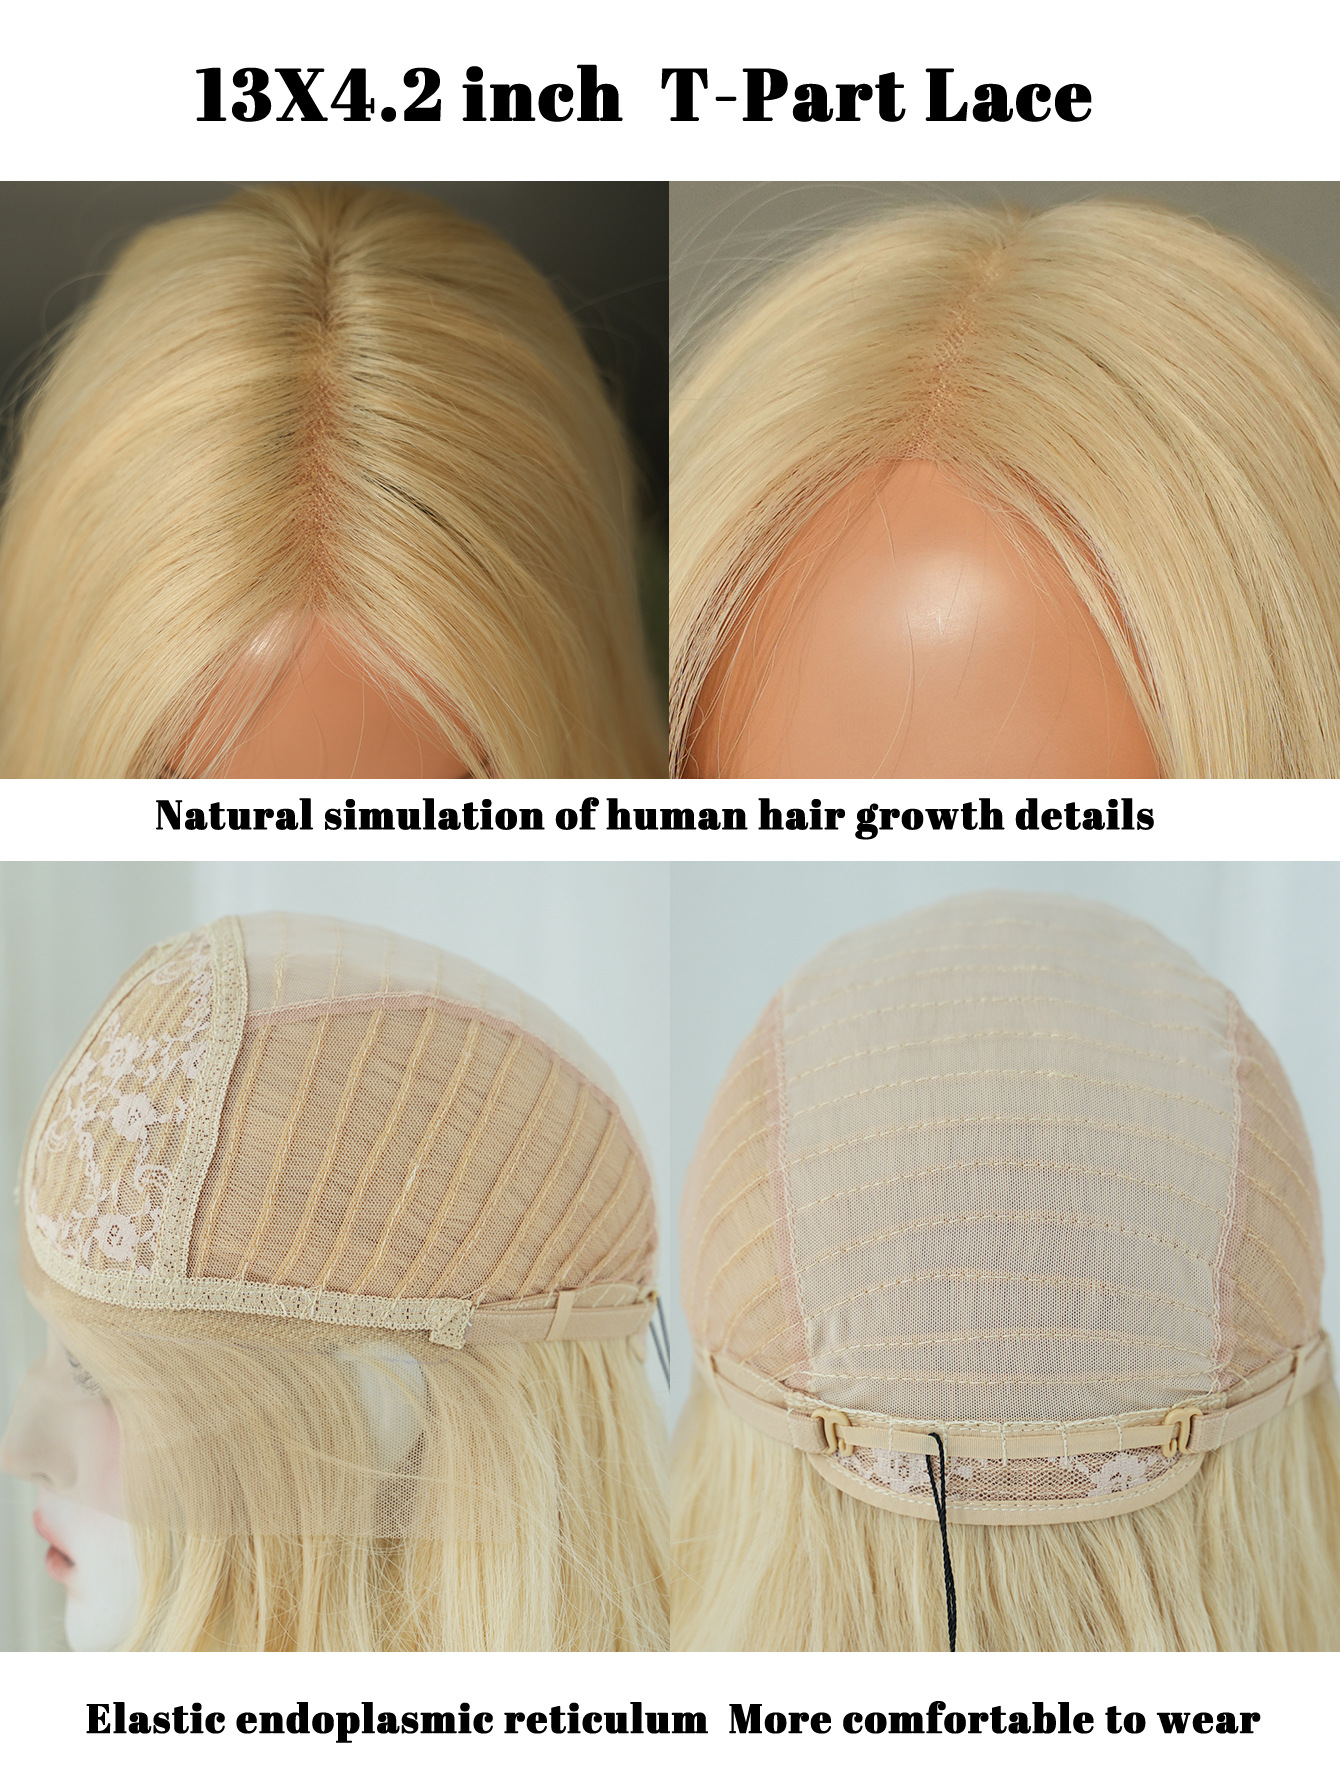 A stylish handwoven lace wig designed for women, featuring a medium parted style and light blonde color